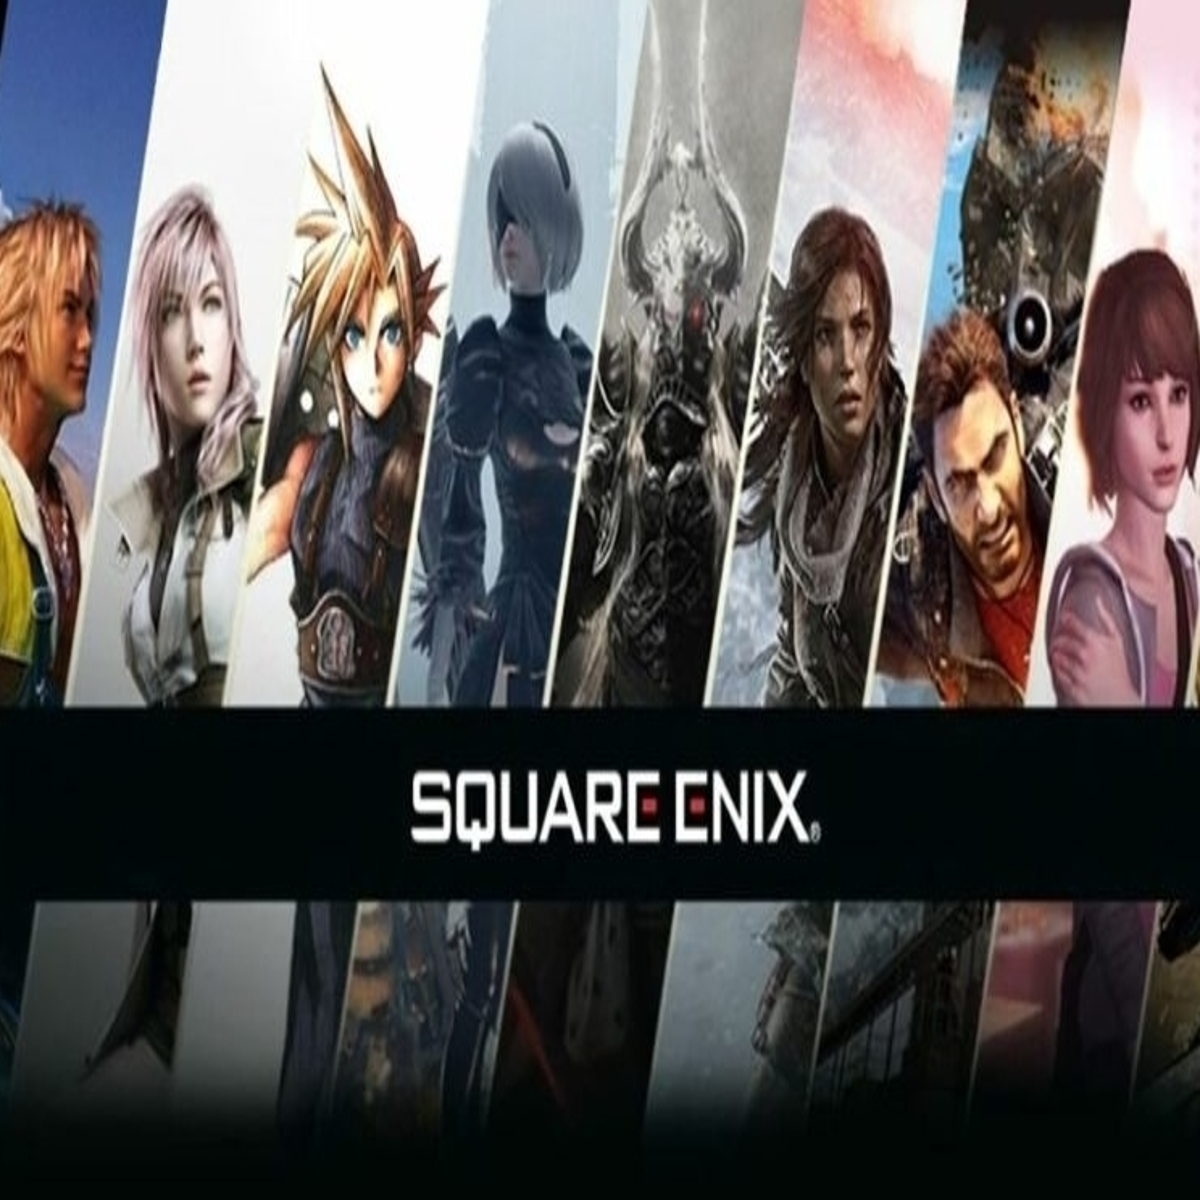 Square Enix will announce several new games over the next few months